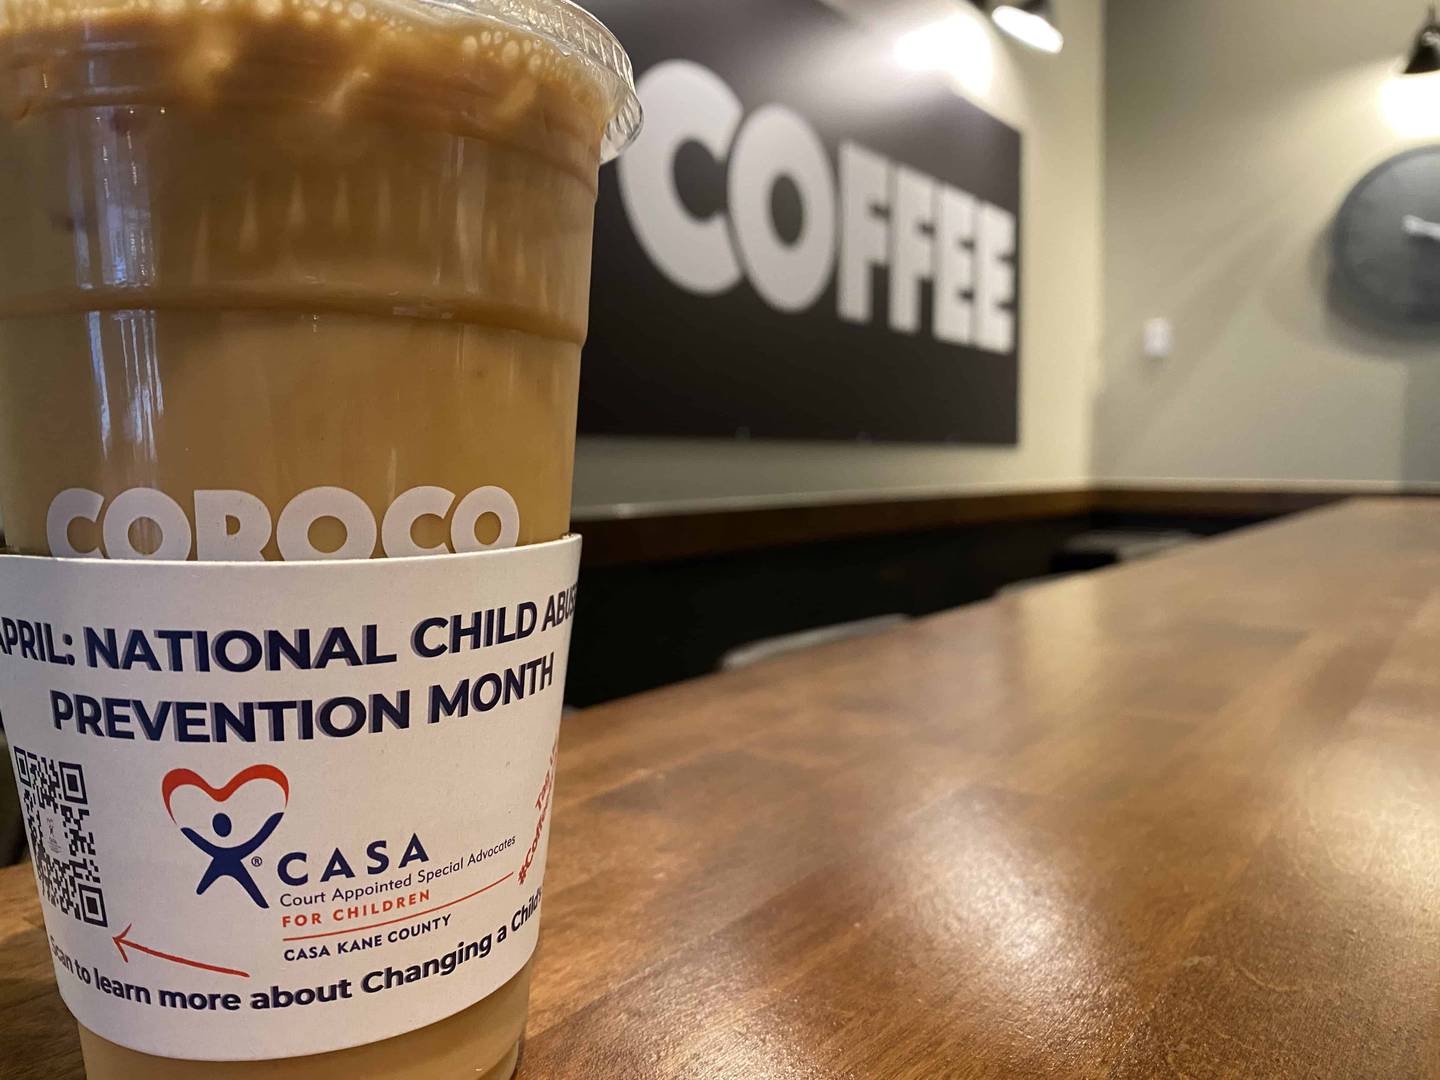 To raise awareness during Child Abuse Prevention Month, CASA of Kane County asked coffee shops throughout Kane County to partner with them and distribute coffee sleeves throughout the month of April.